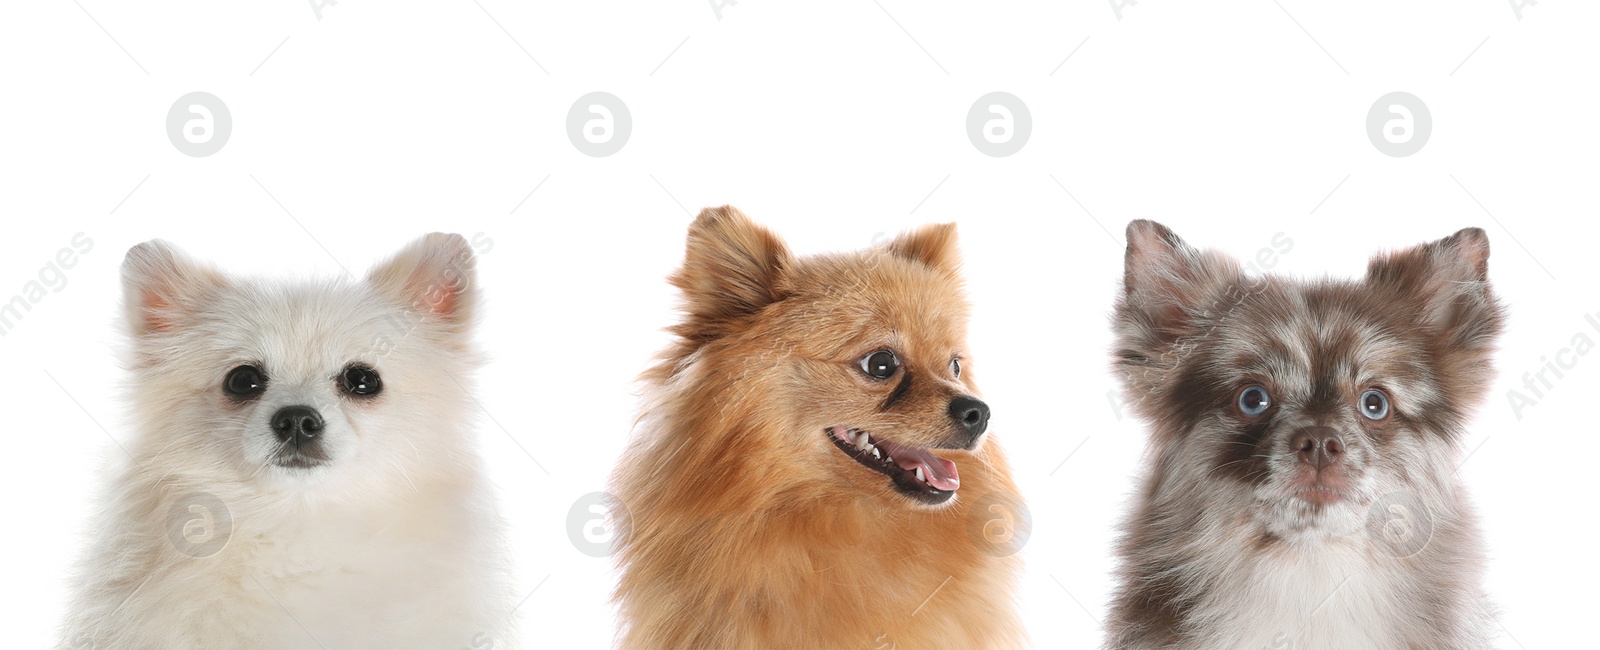 Image of Cute funny dogs on white background. Banner design